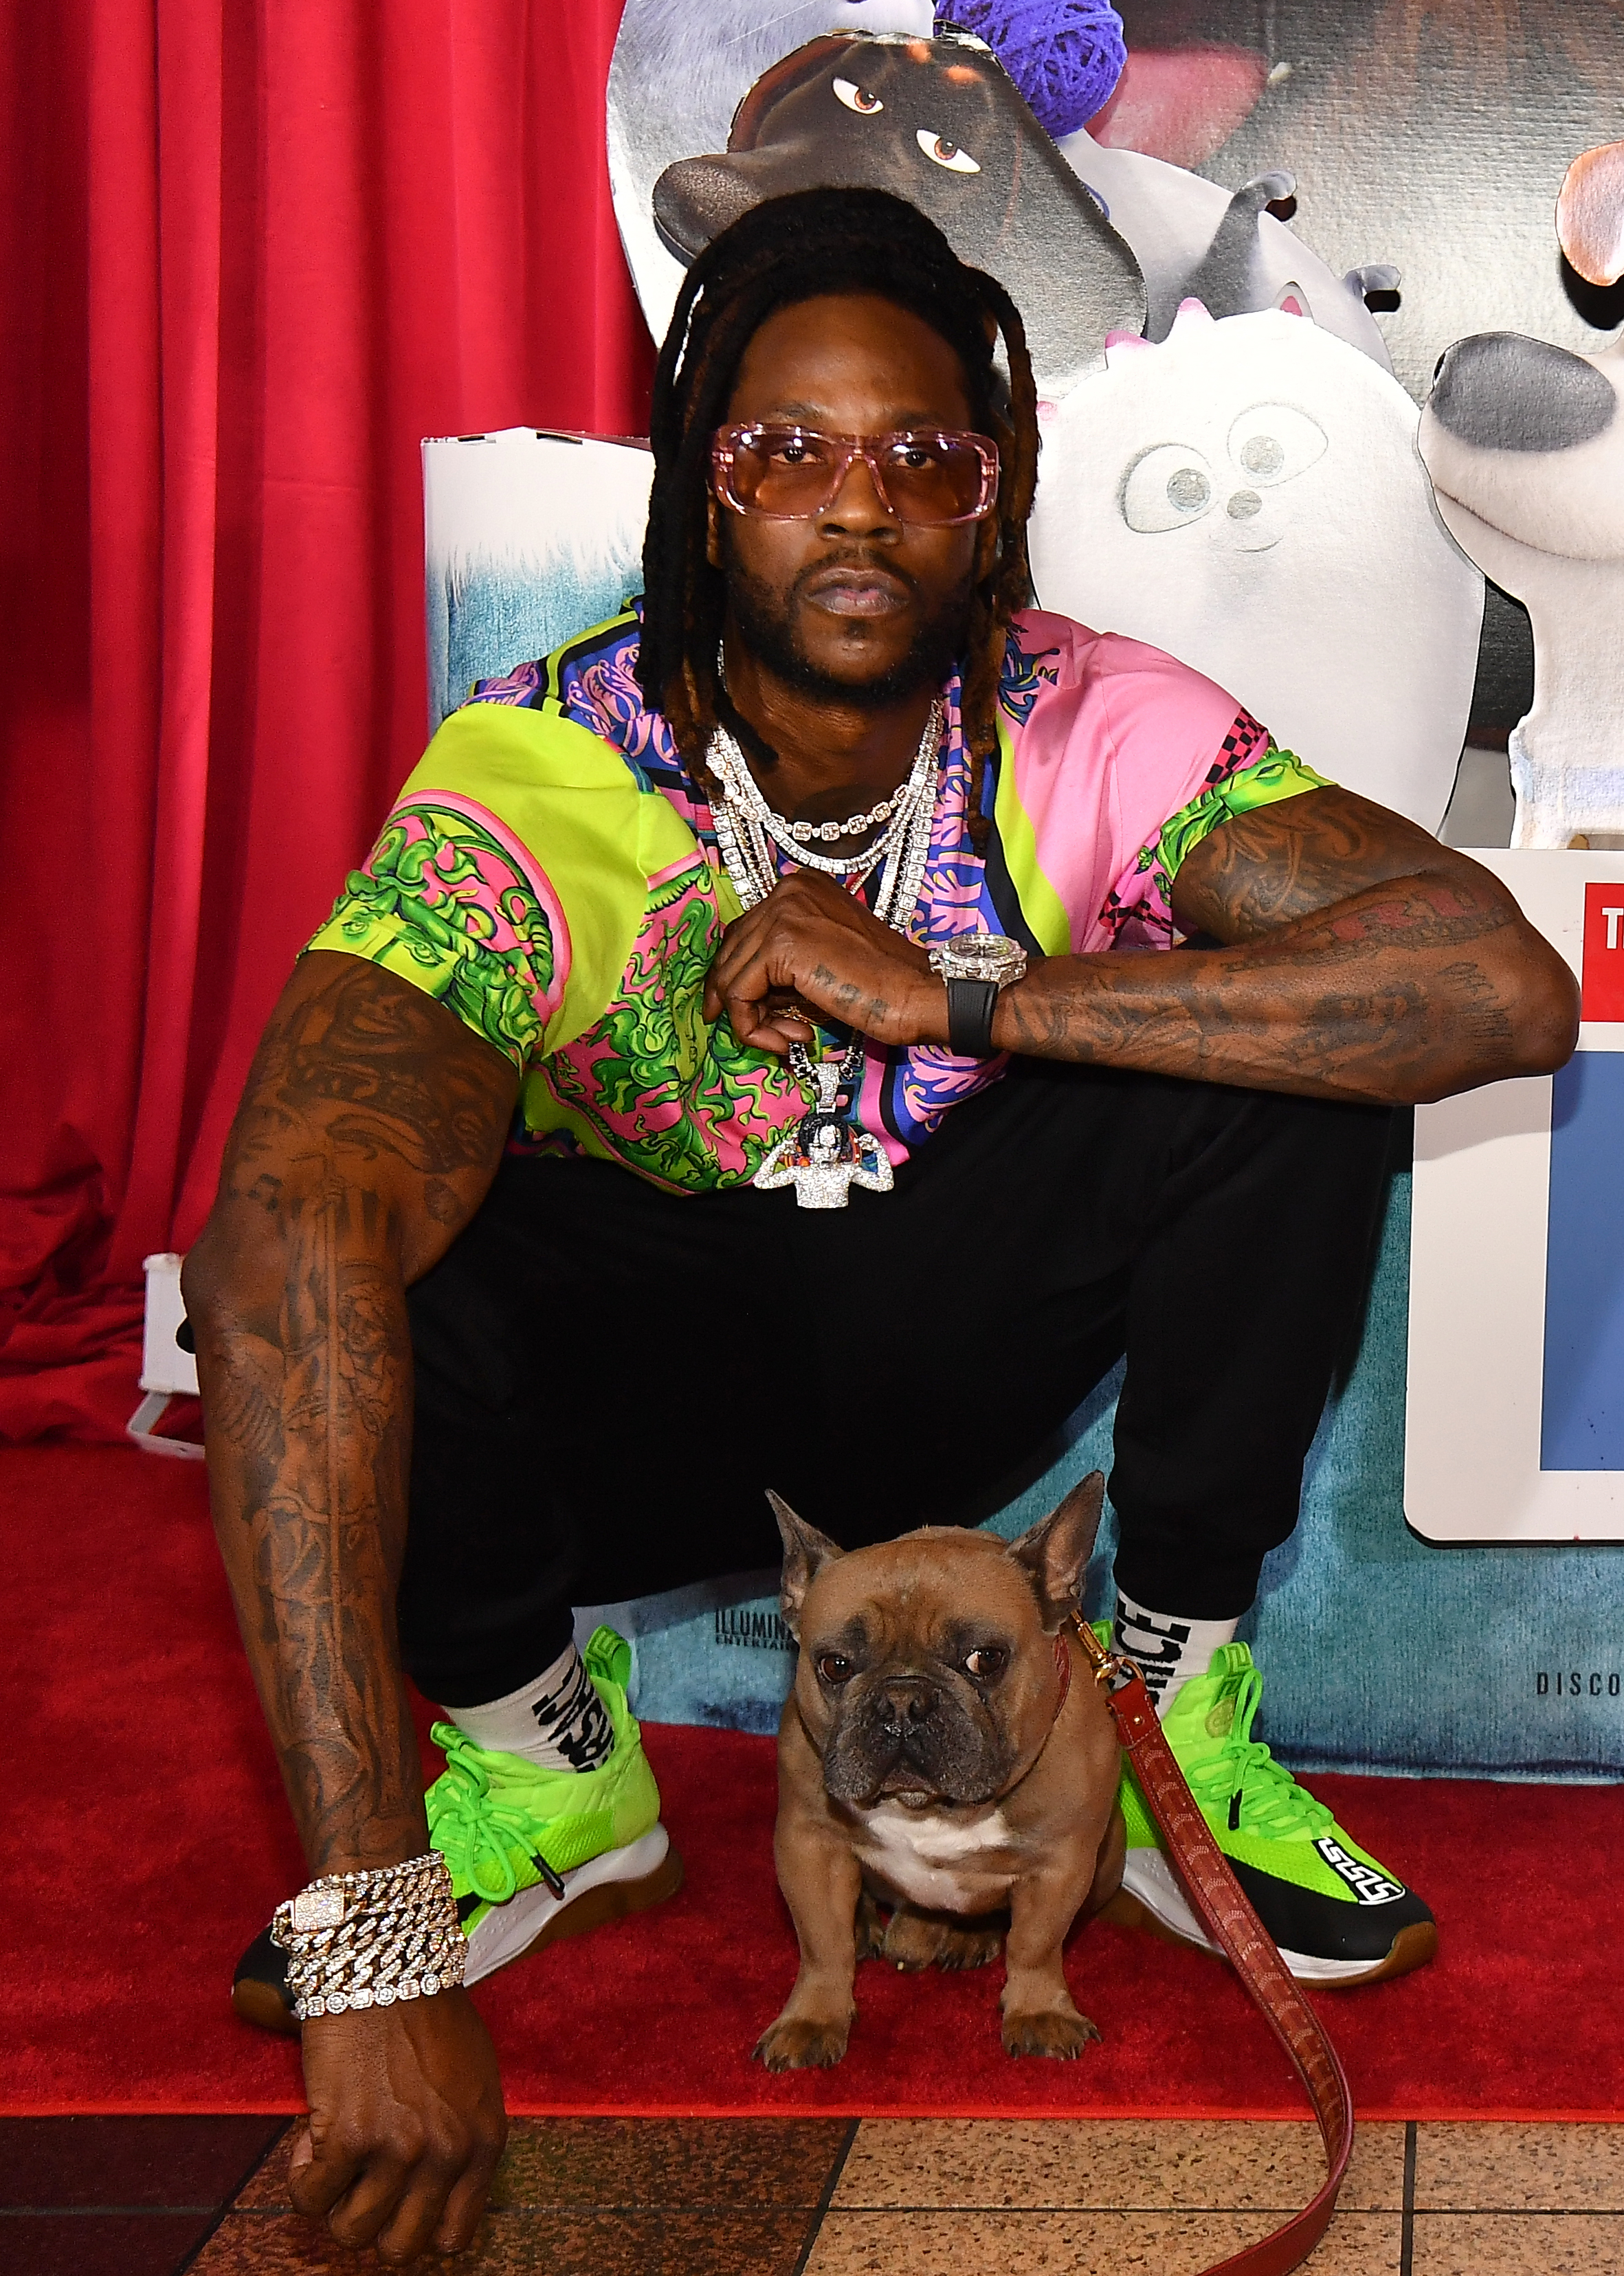 2 Chainz Host The Secret Life Of Pets 2 Screening In ATL With Dog Trappy